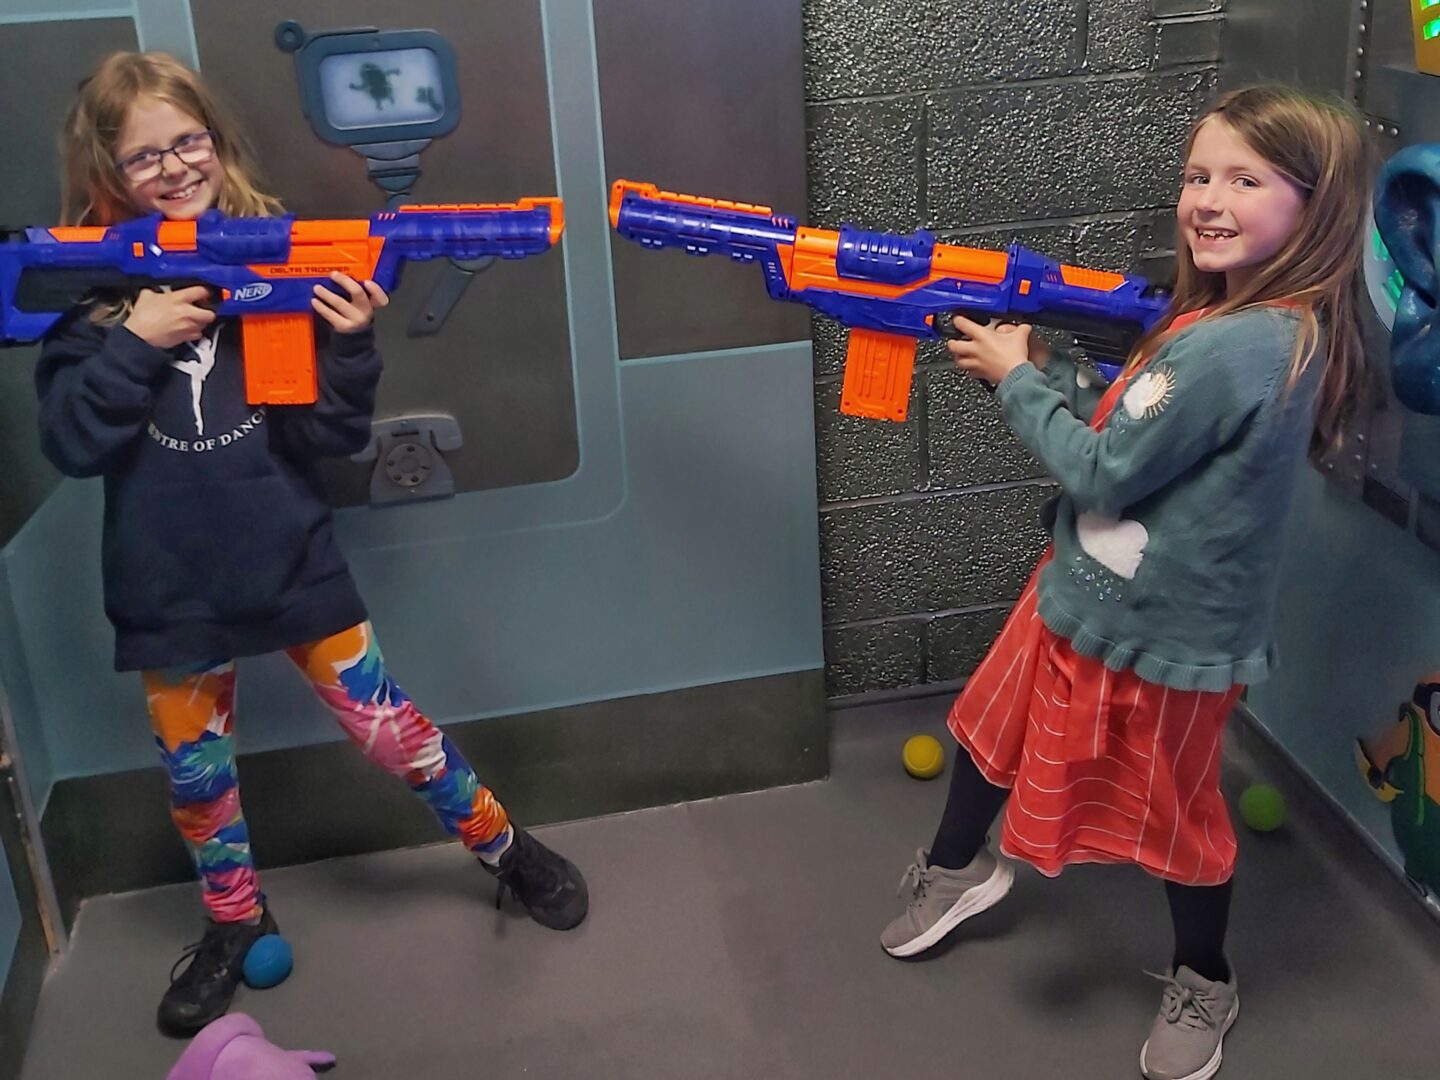 Children with nerf guns pointed at each other at CyberQ escape rooms an ideal day out for a rainy day during Worcestershire school holidays